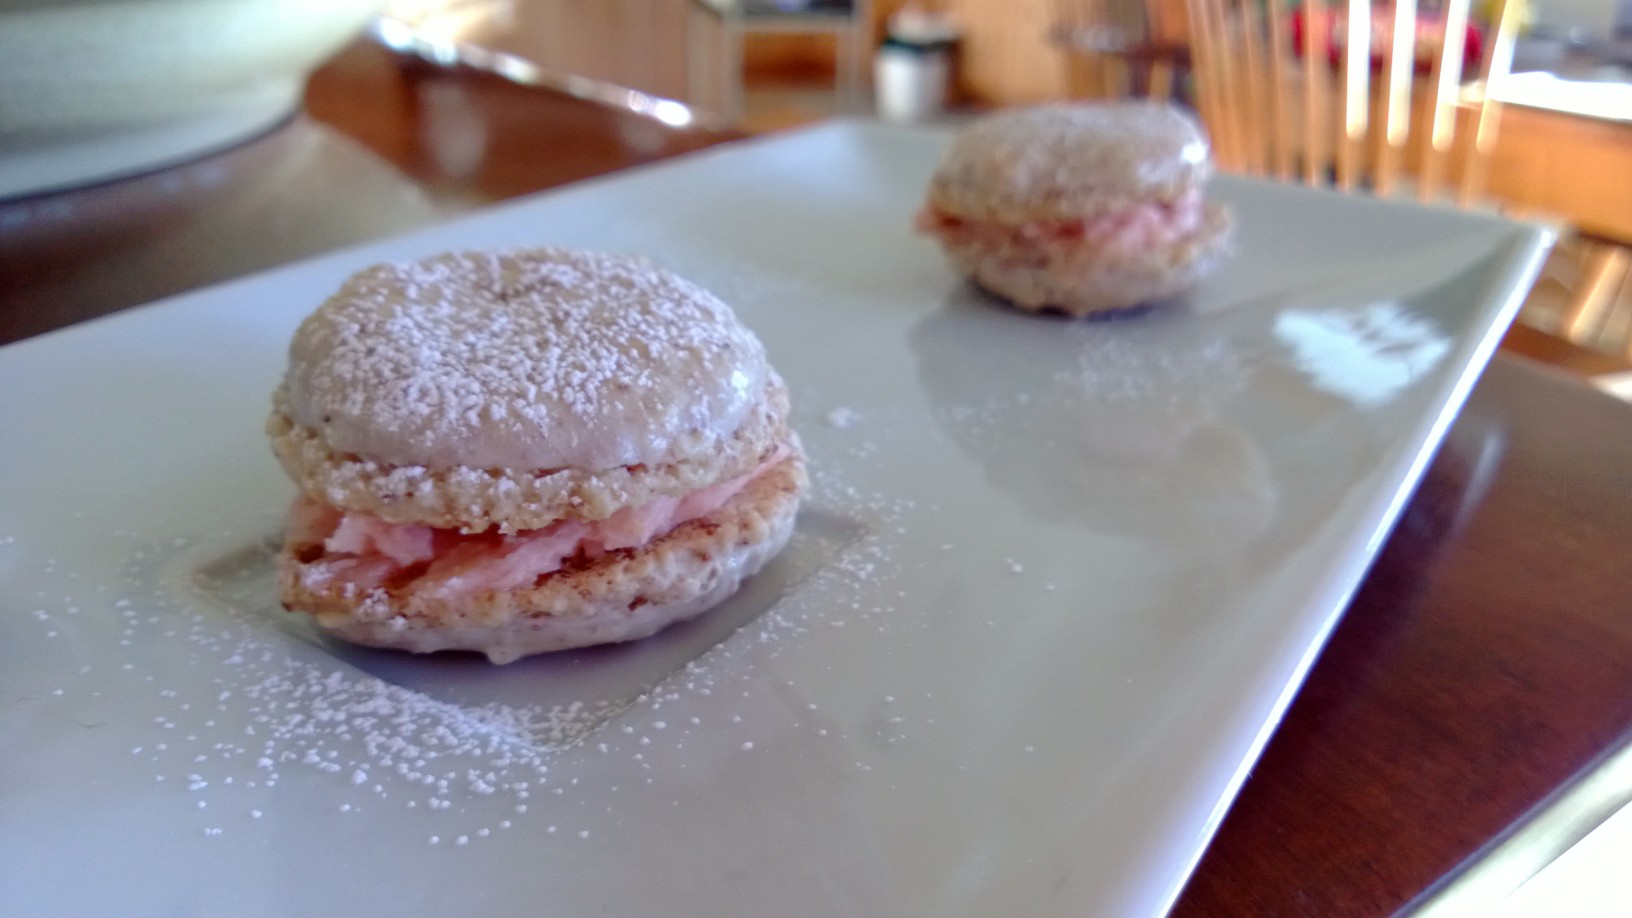 Almond macarons with grapefruit filling